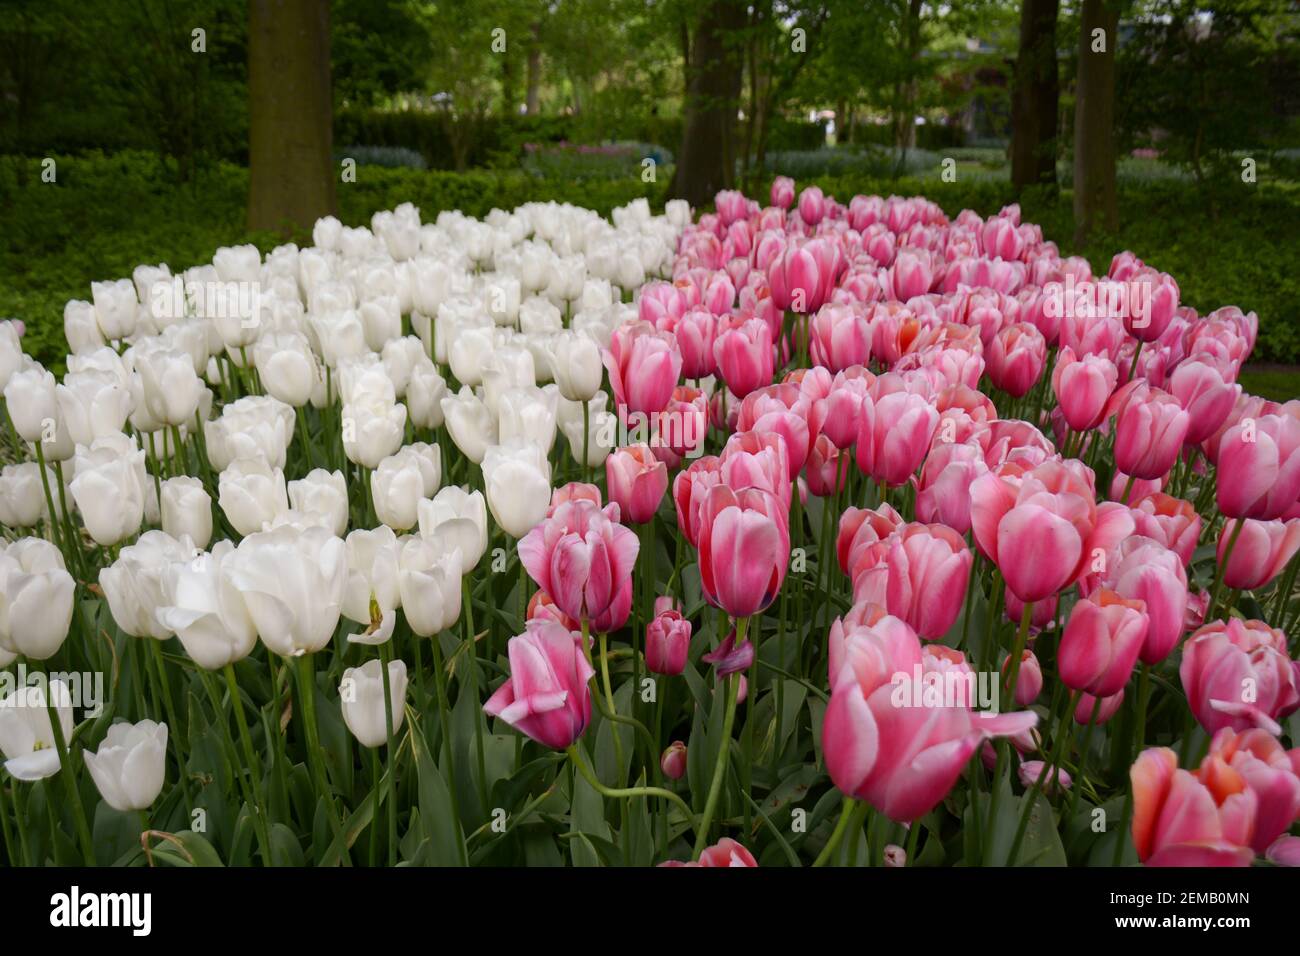 Beautiful pink and also white tulips in full bloom at a garden in Amsterdam, Netherlands. Stock Photo